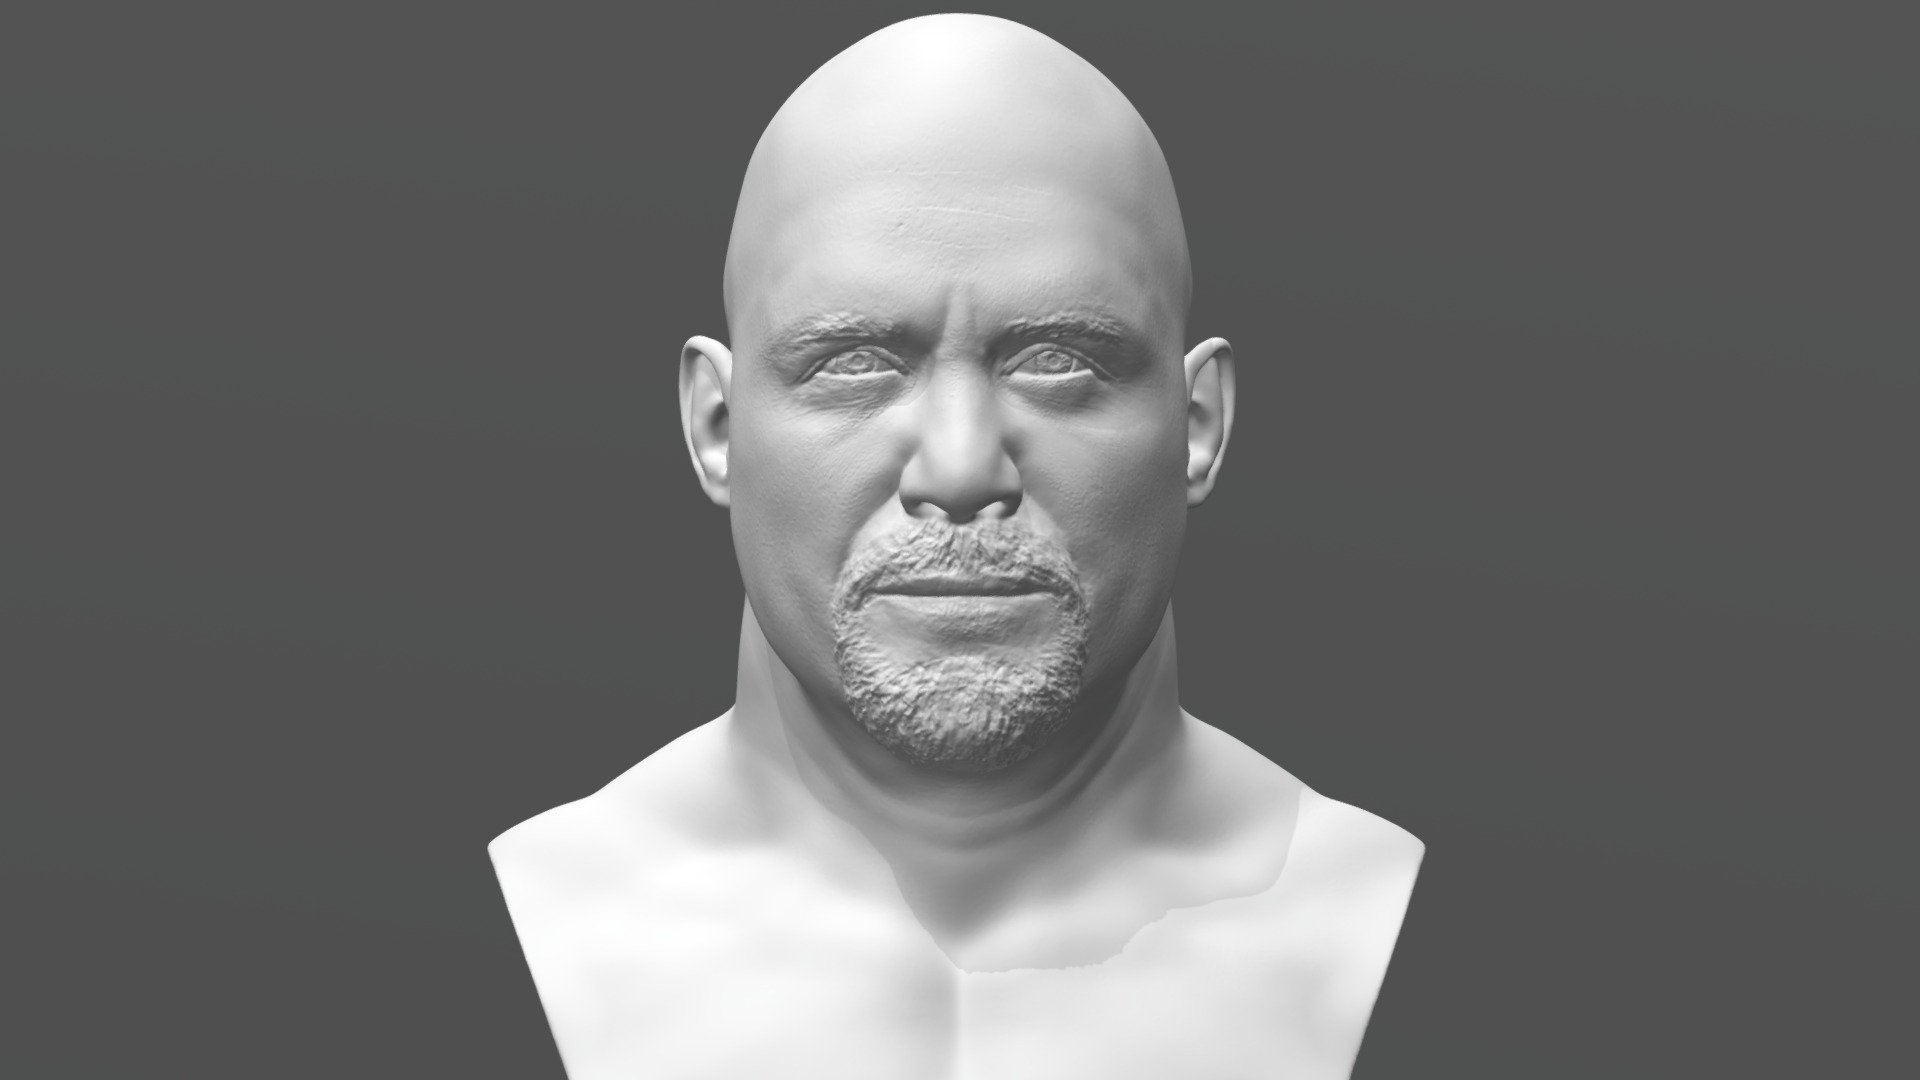 Here is Stone Cold Steve Austin bust 3D model ready for 3D printing. The model current size is 5 cm height, but you are free to scale it. Zip file contains stl. The model was created in ZBrush.

If you have any questions please don’t hesitate to contact me. I will respond you ASAP. I encourage you to check my other celebrity 3D models 3d model